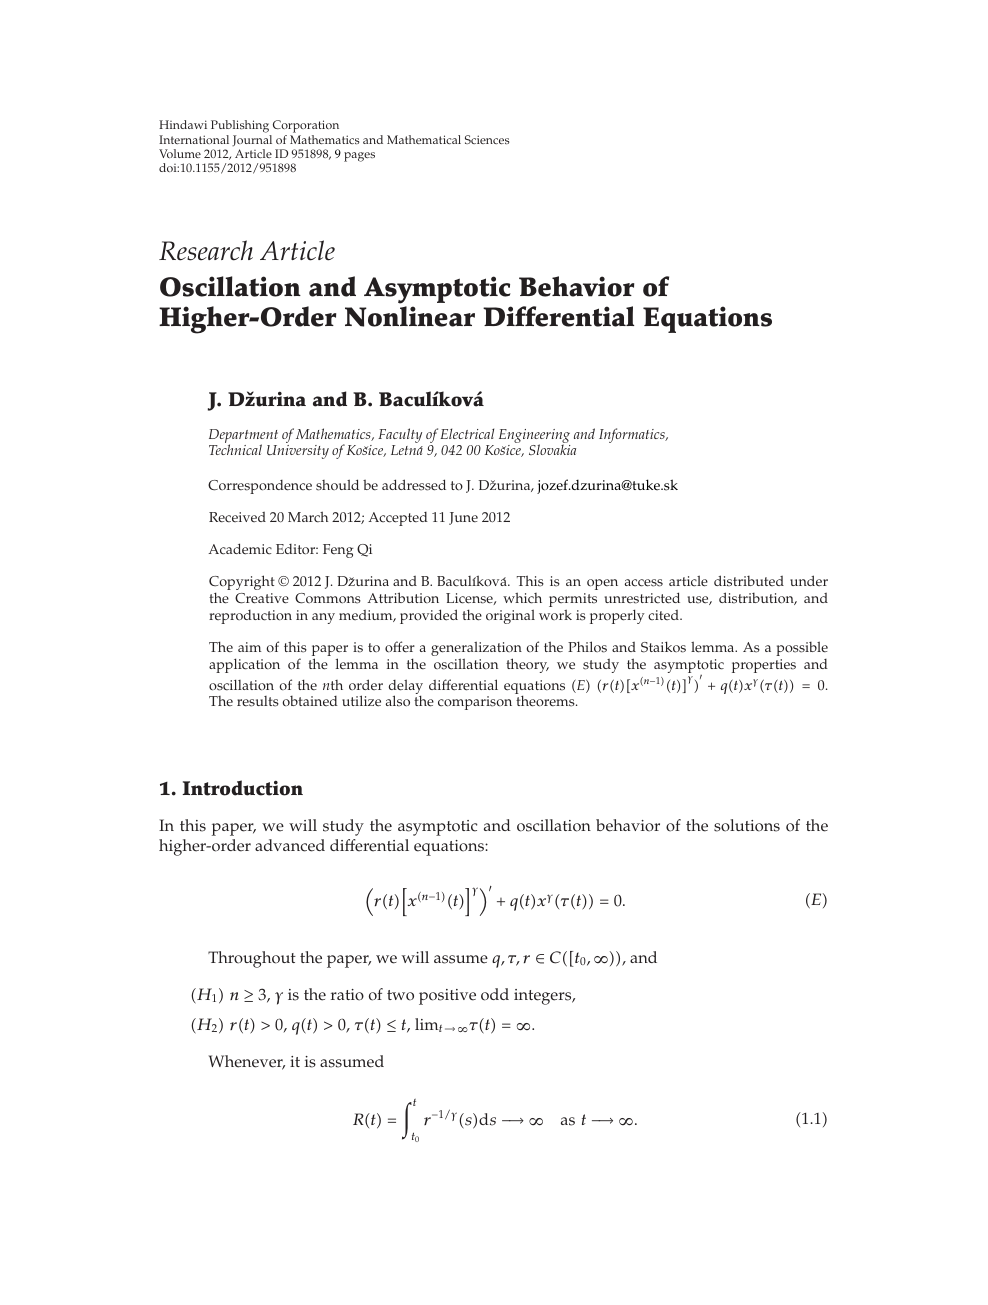 Oscillation And Asymptotic Behavior Of Higher Order Nonlinear Differential Equations Topic Of Research Paper In Mathematics Download Scholarly Article Pdf And Read For Free On Cyberleninka Open Science Hub